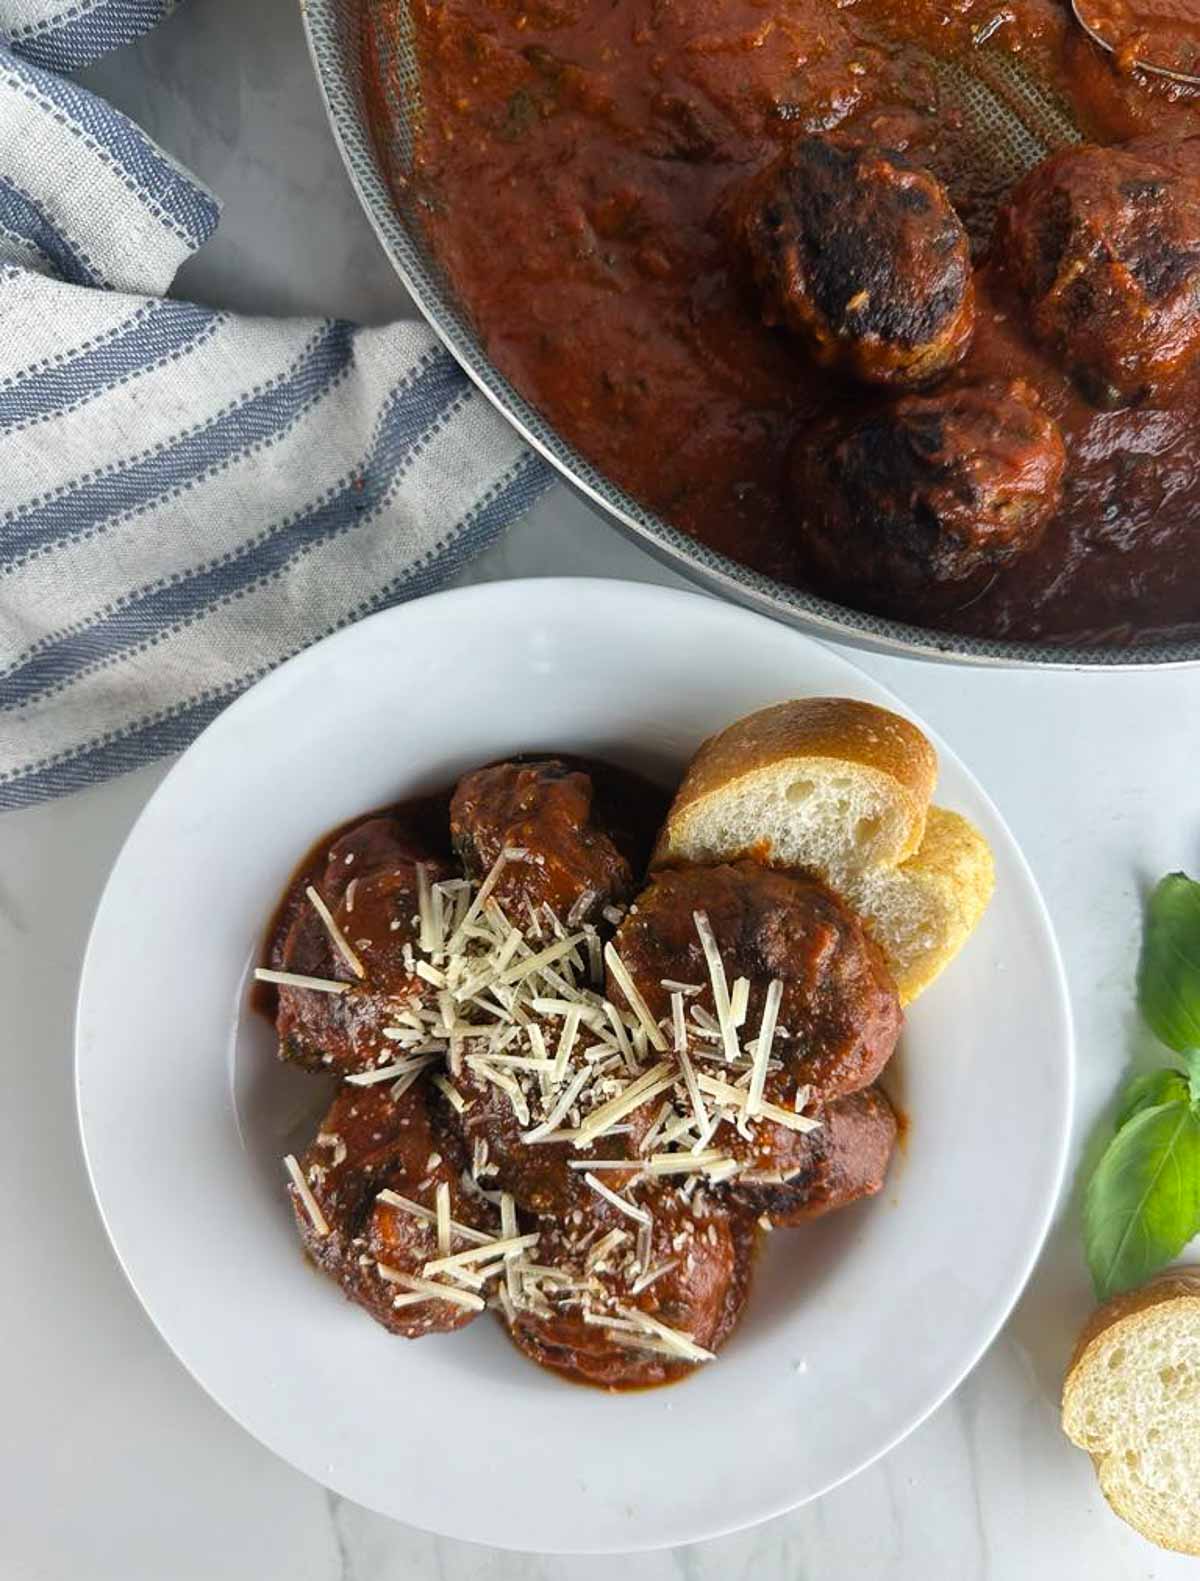 Authentic Italian meatballs are based on a recipe my Italian grandma used to make. You won't believe how easy old fashioned meatballs in tomato sauce are to make. Once you make them, you'll never go back to store-bought meatballs again!